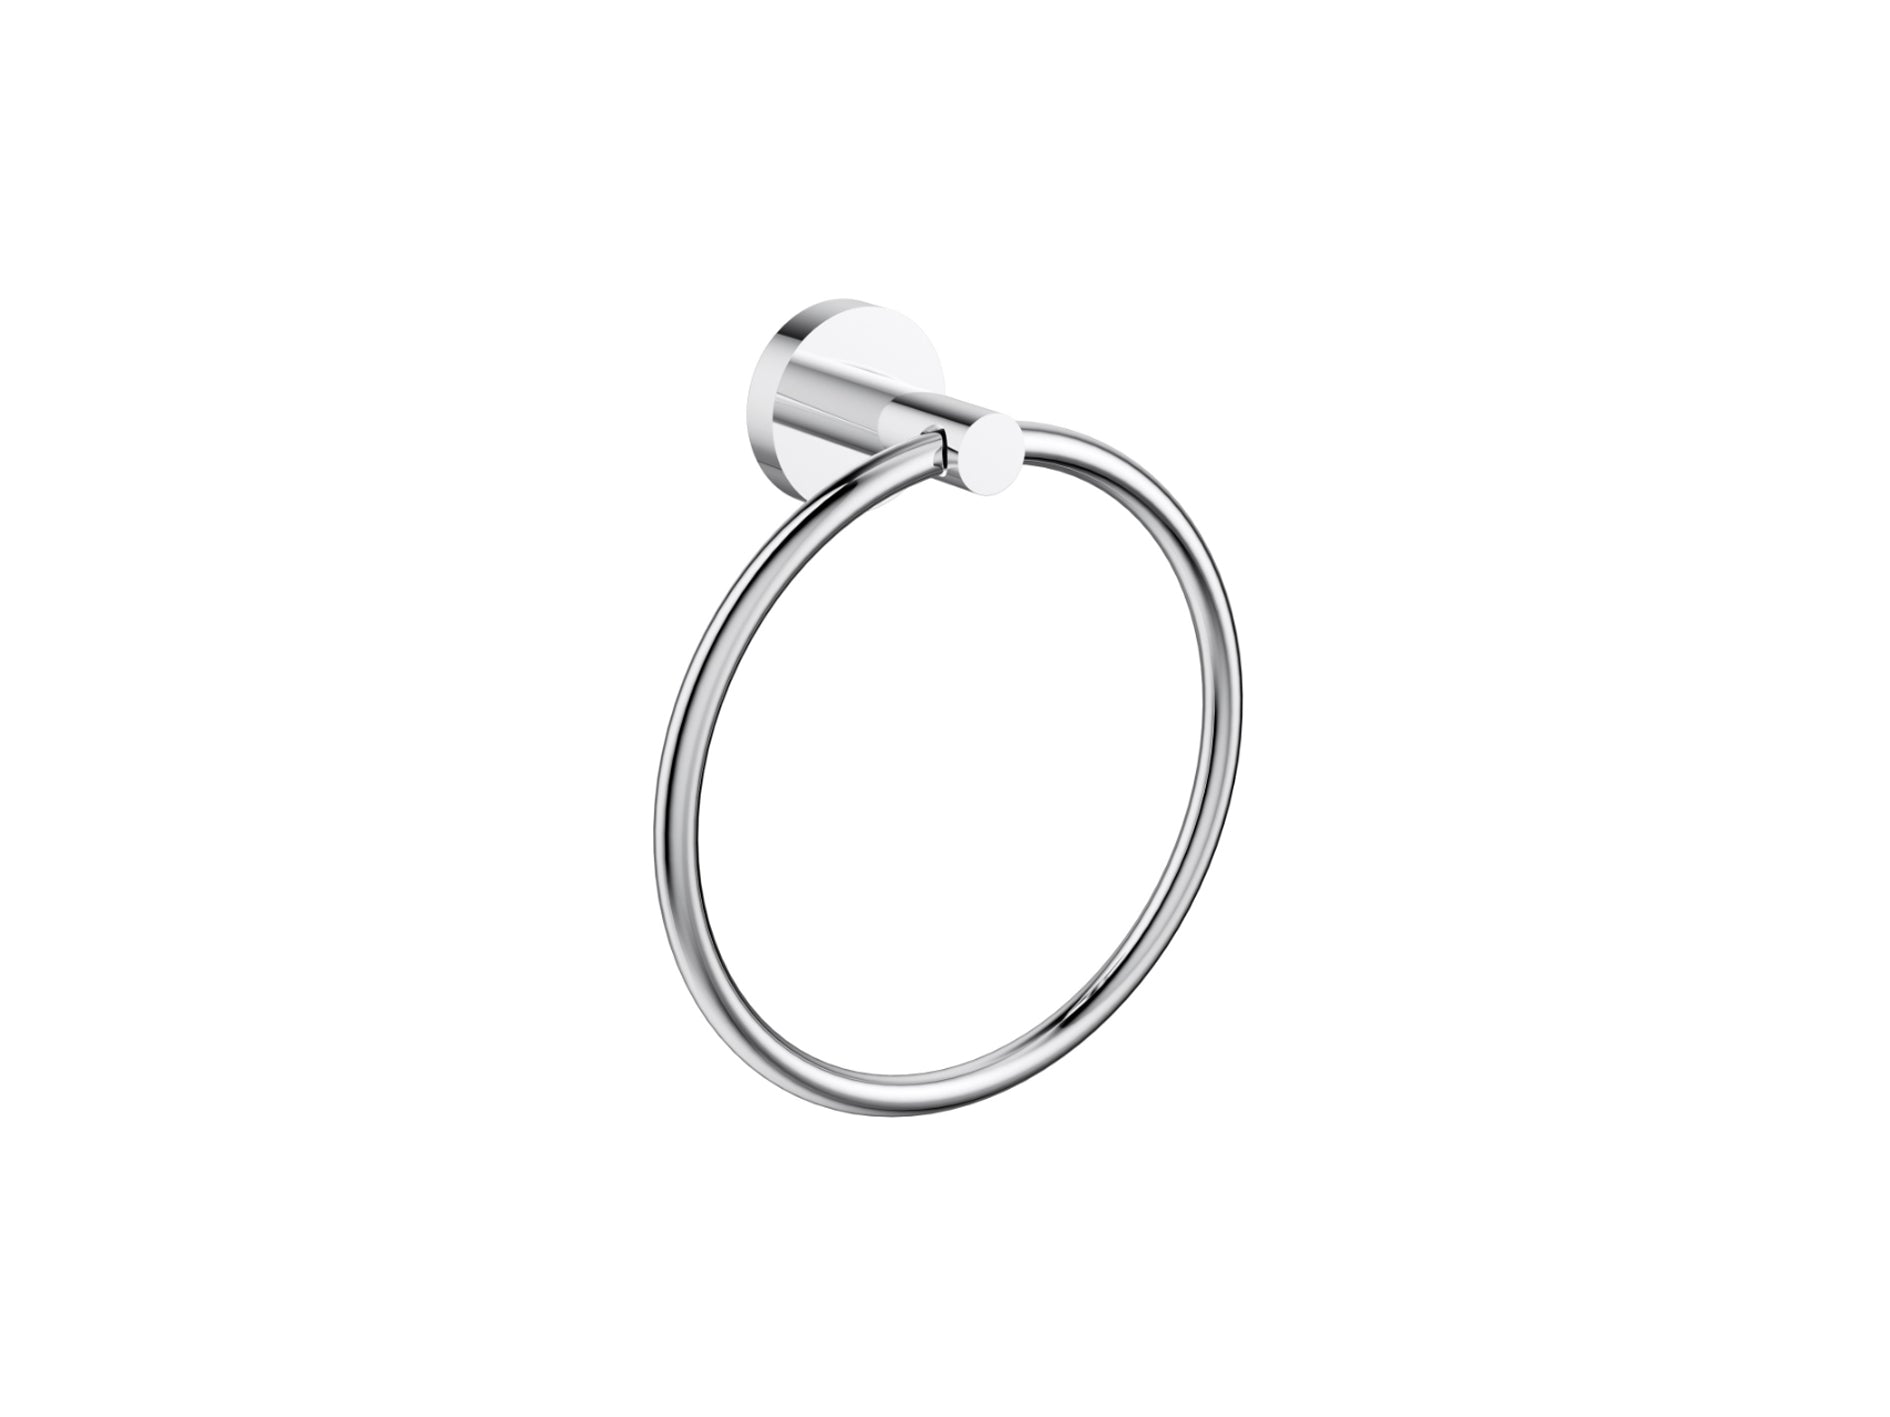 Lushh Maple Towel Ring LS-MP-002